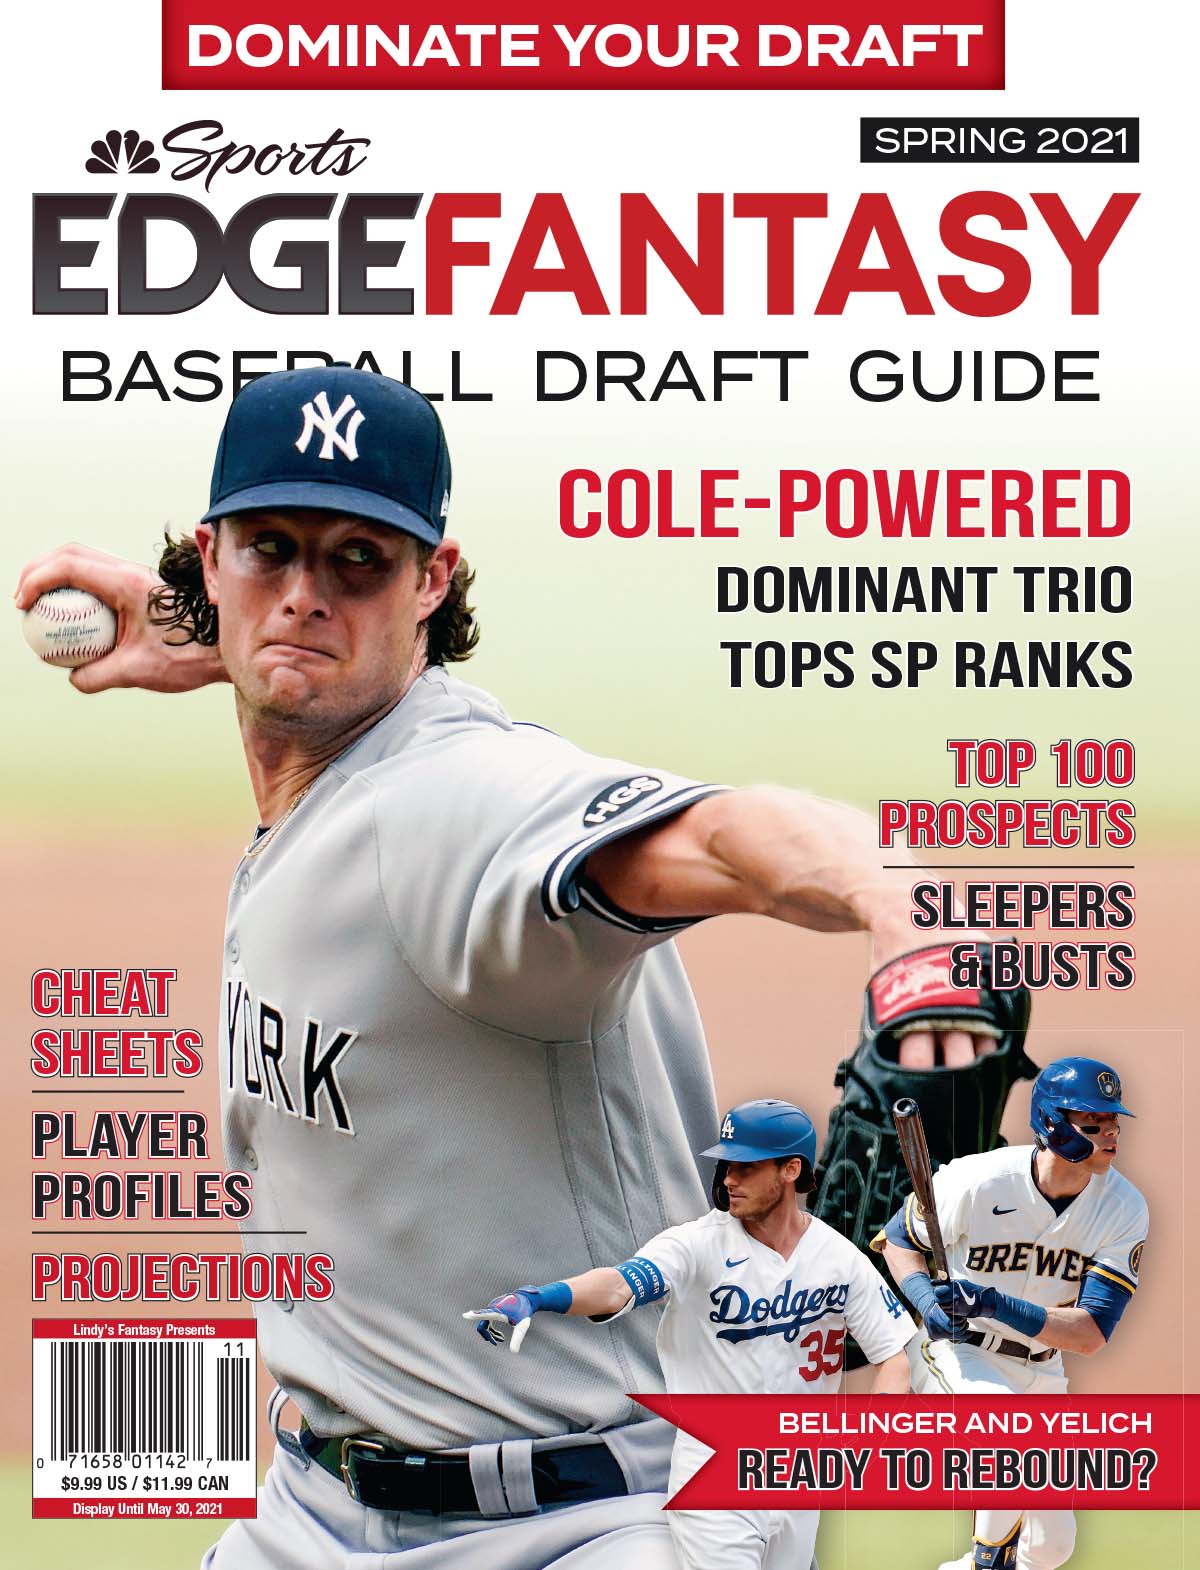 MLB fantasy sports DFS and betting news and analysis